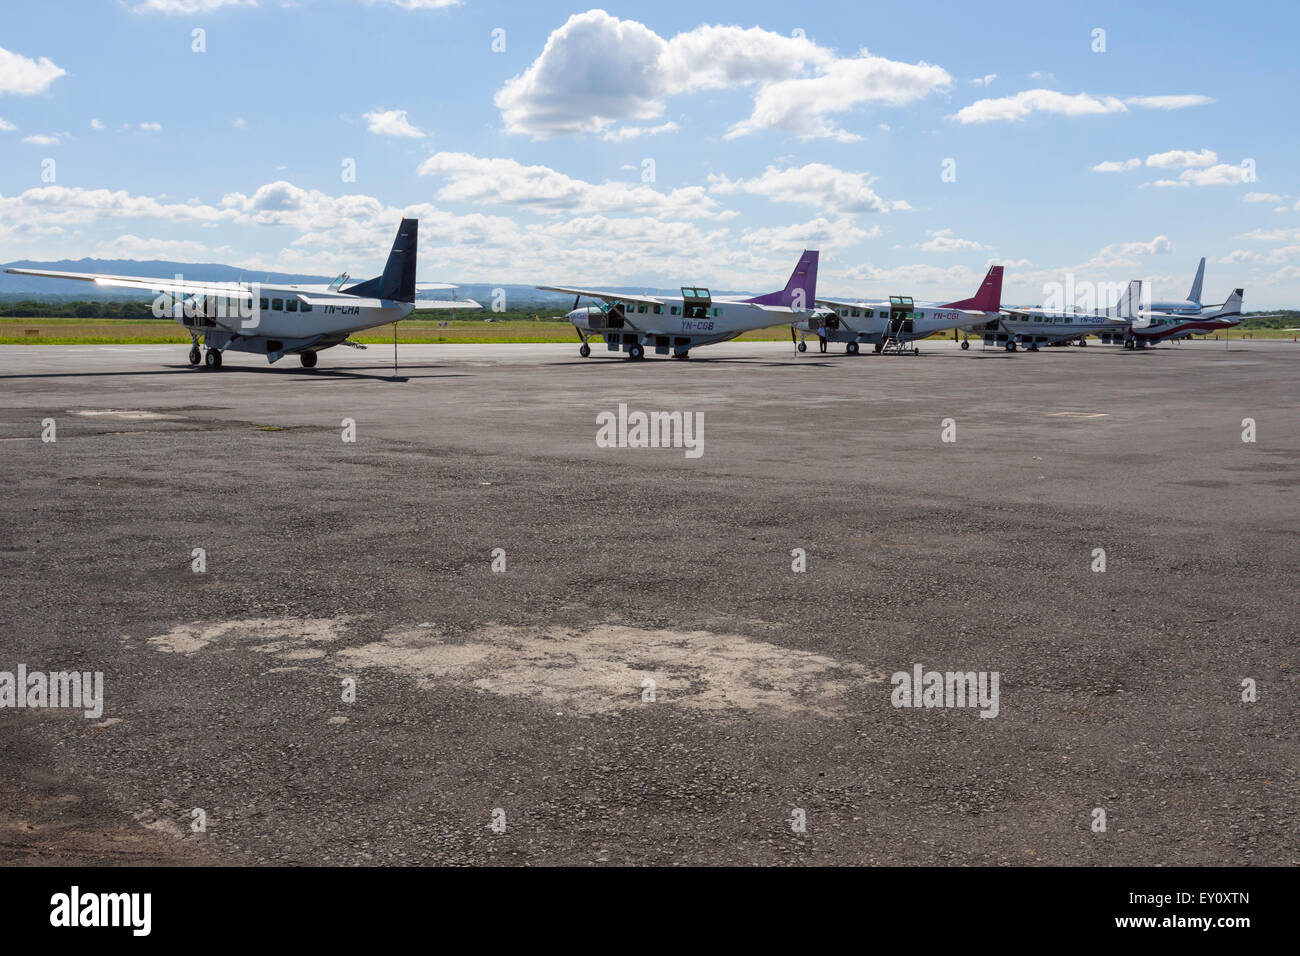 La Costeña airplanes parked at Augusto C. Sandino International Airport in Managua, Nicaragua Stock Photo